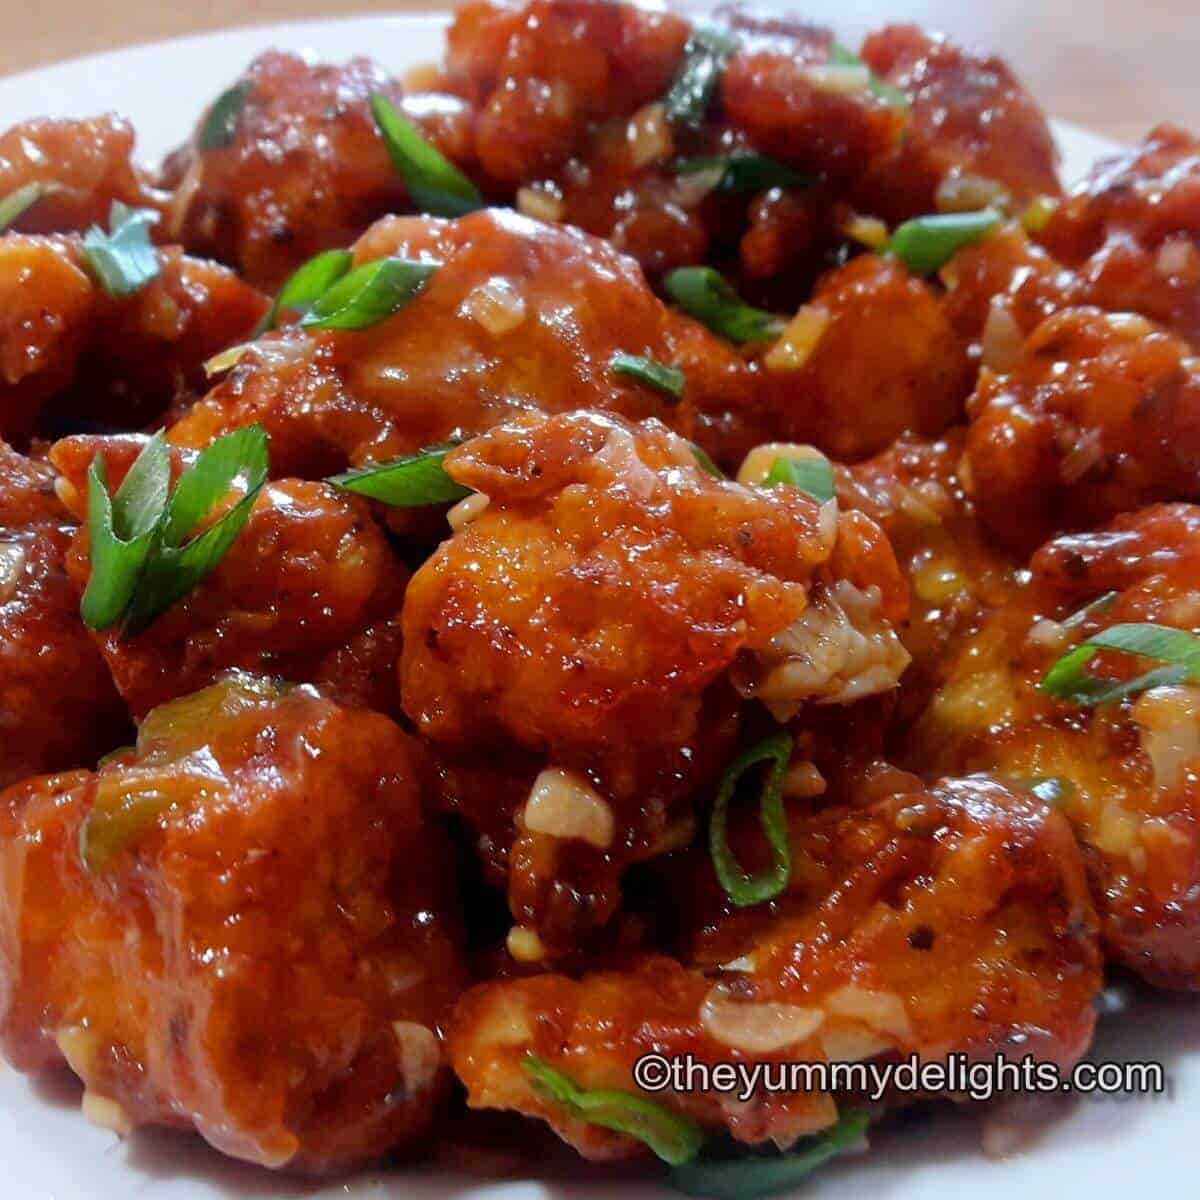 close up of gobi manchurian garnished with spring onion greens.